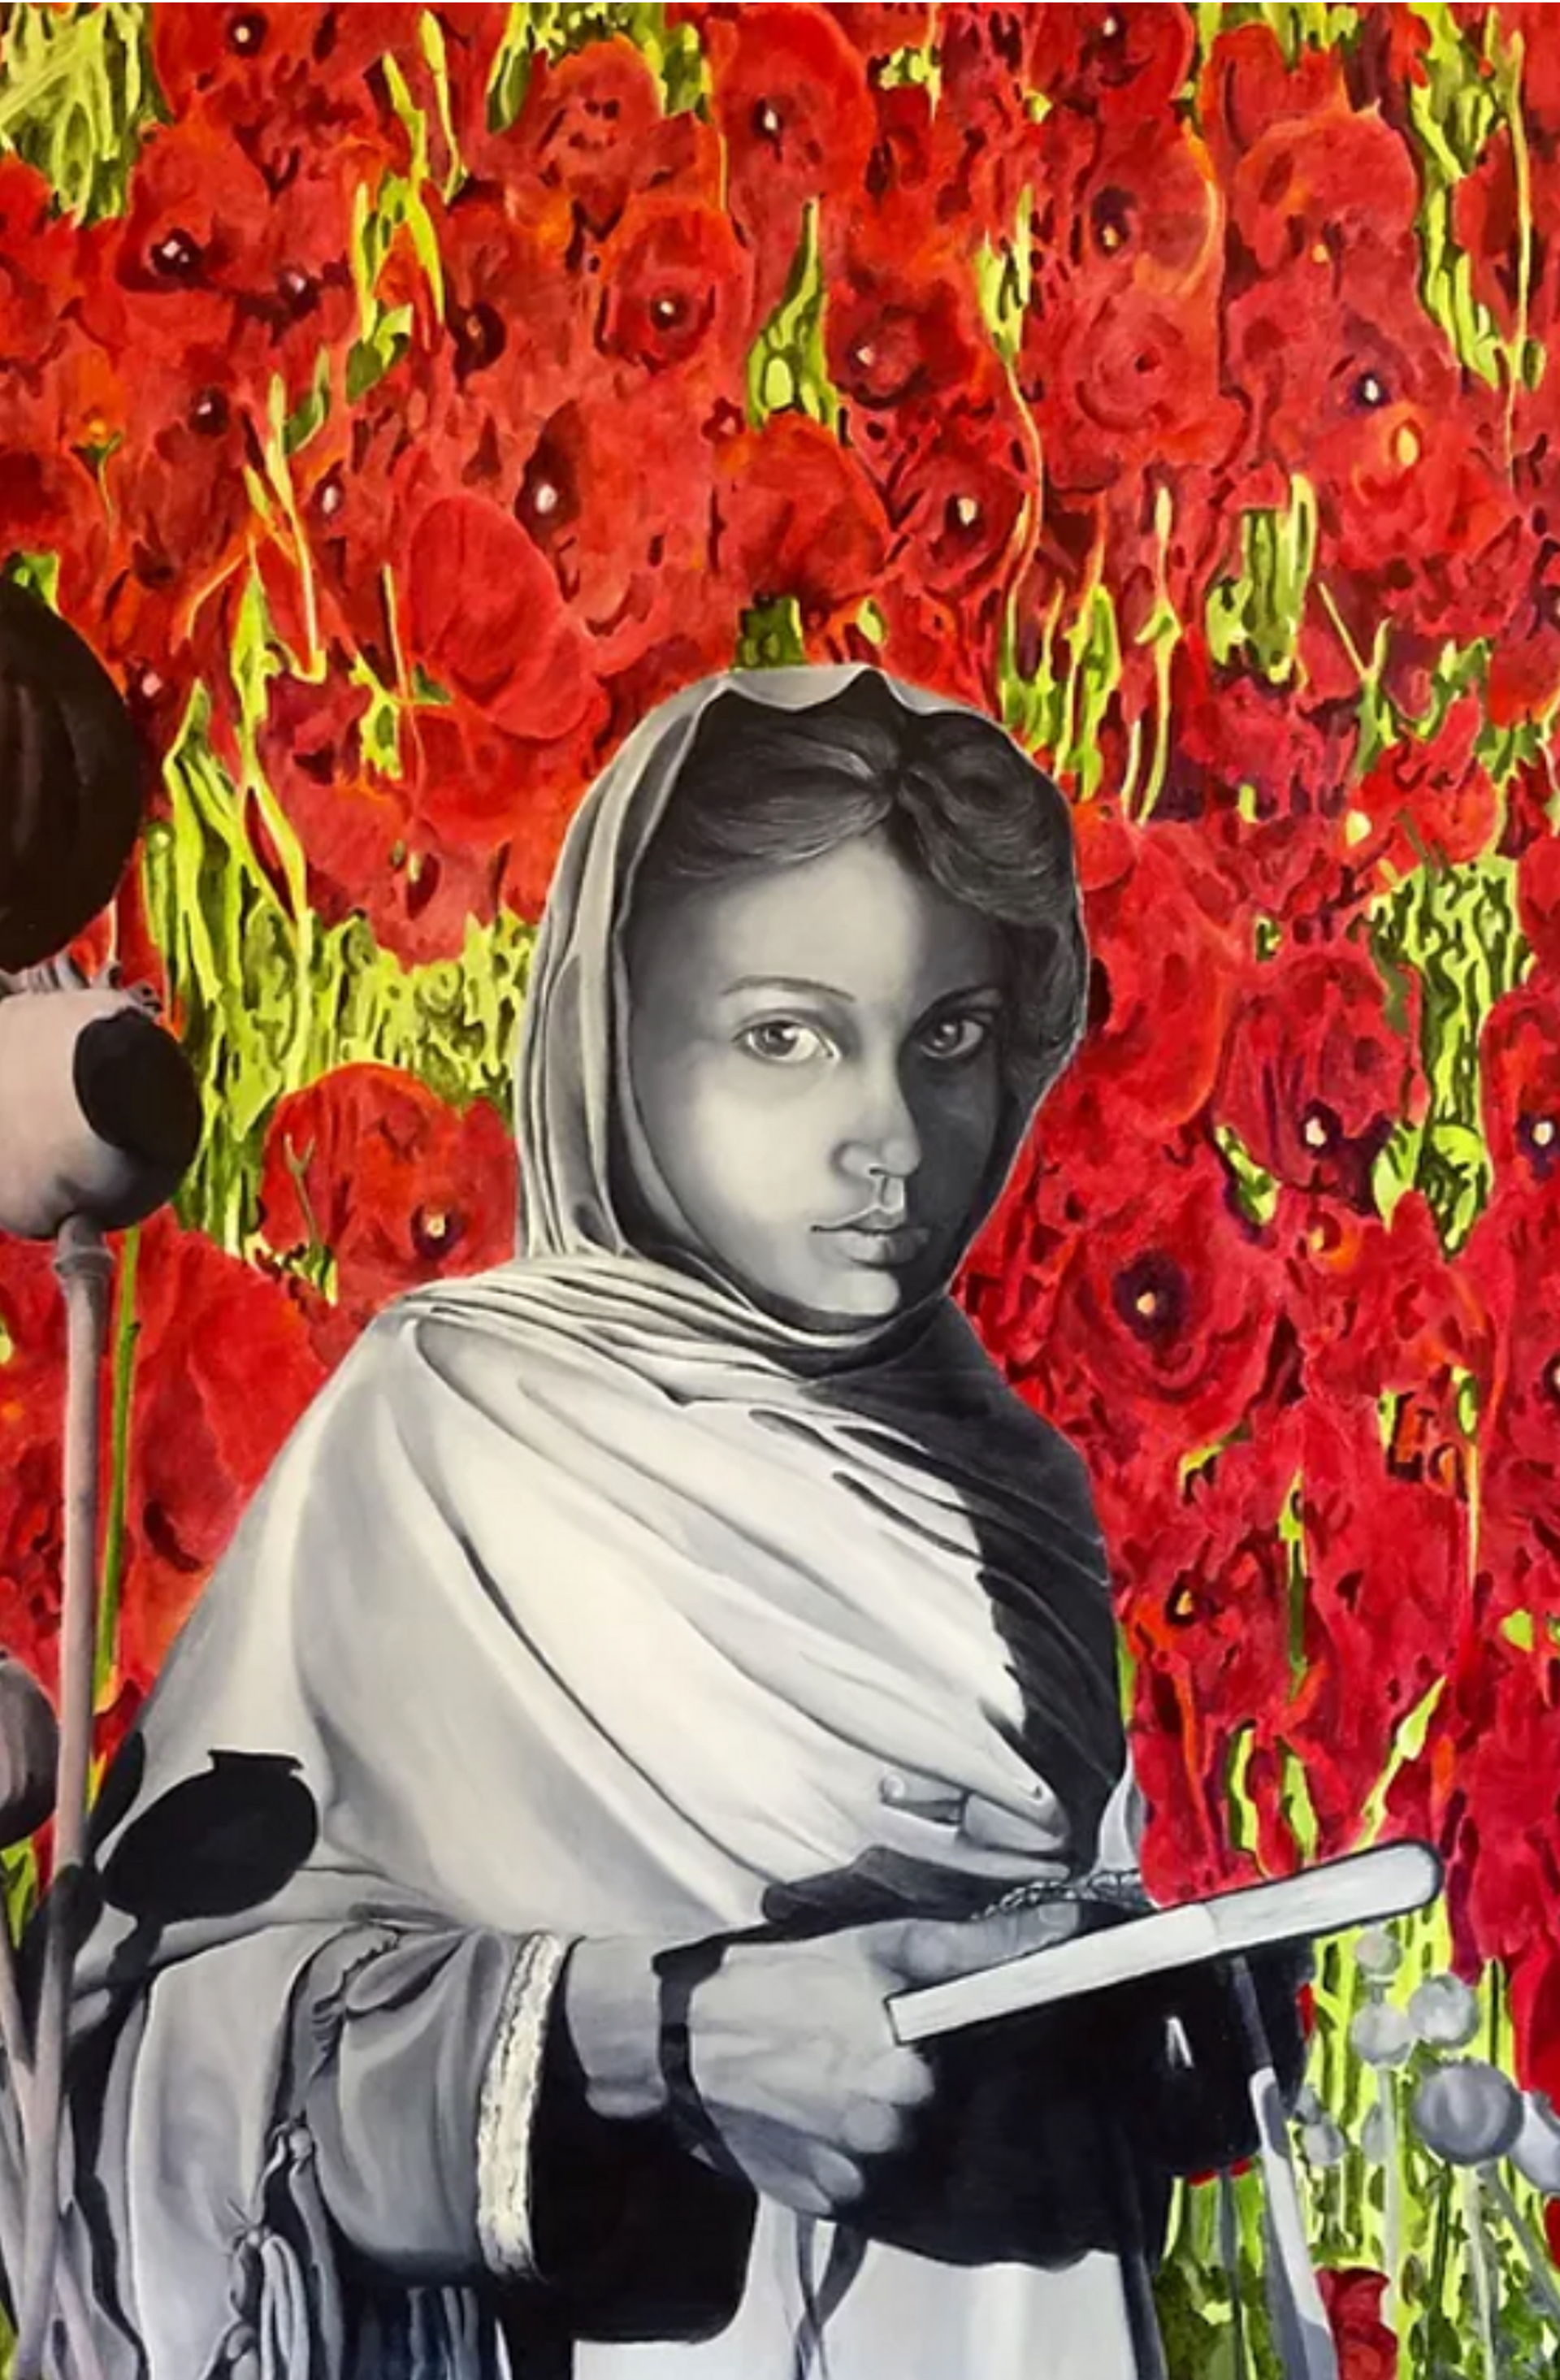 “Red Poppies”, Children's right: The right to education. by Andra Daans